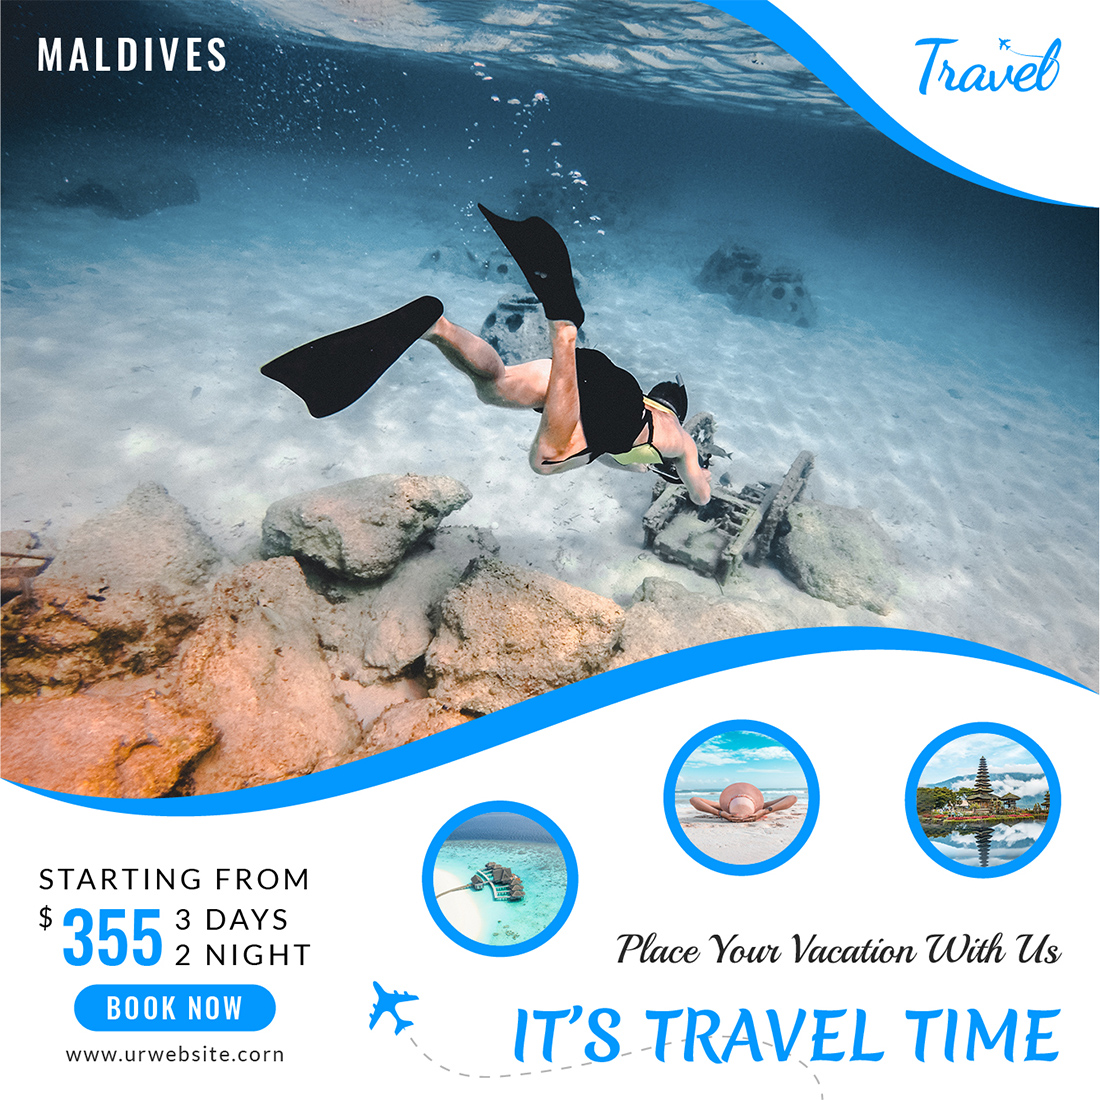 Travelling The World Social Media Post Templates for travel agency.